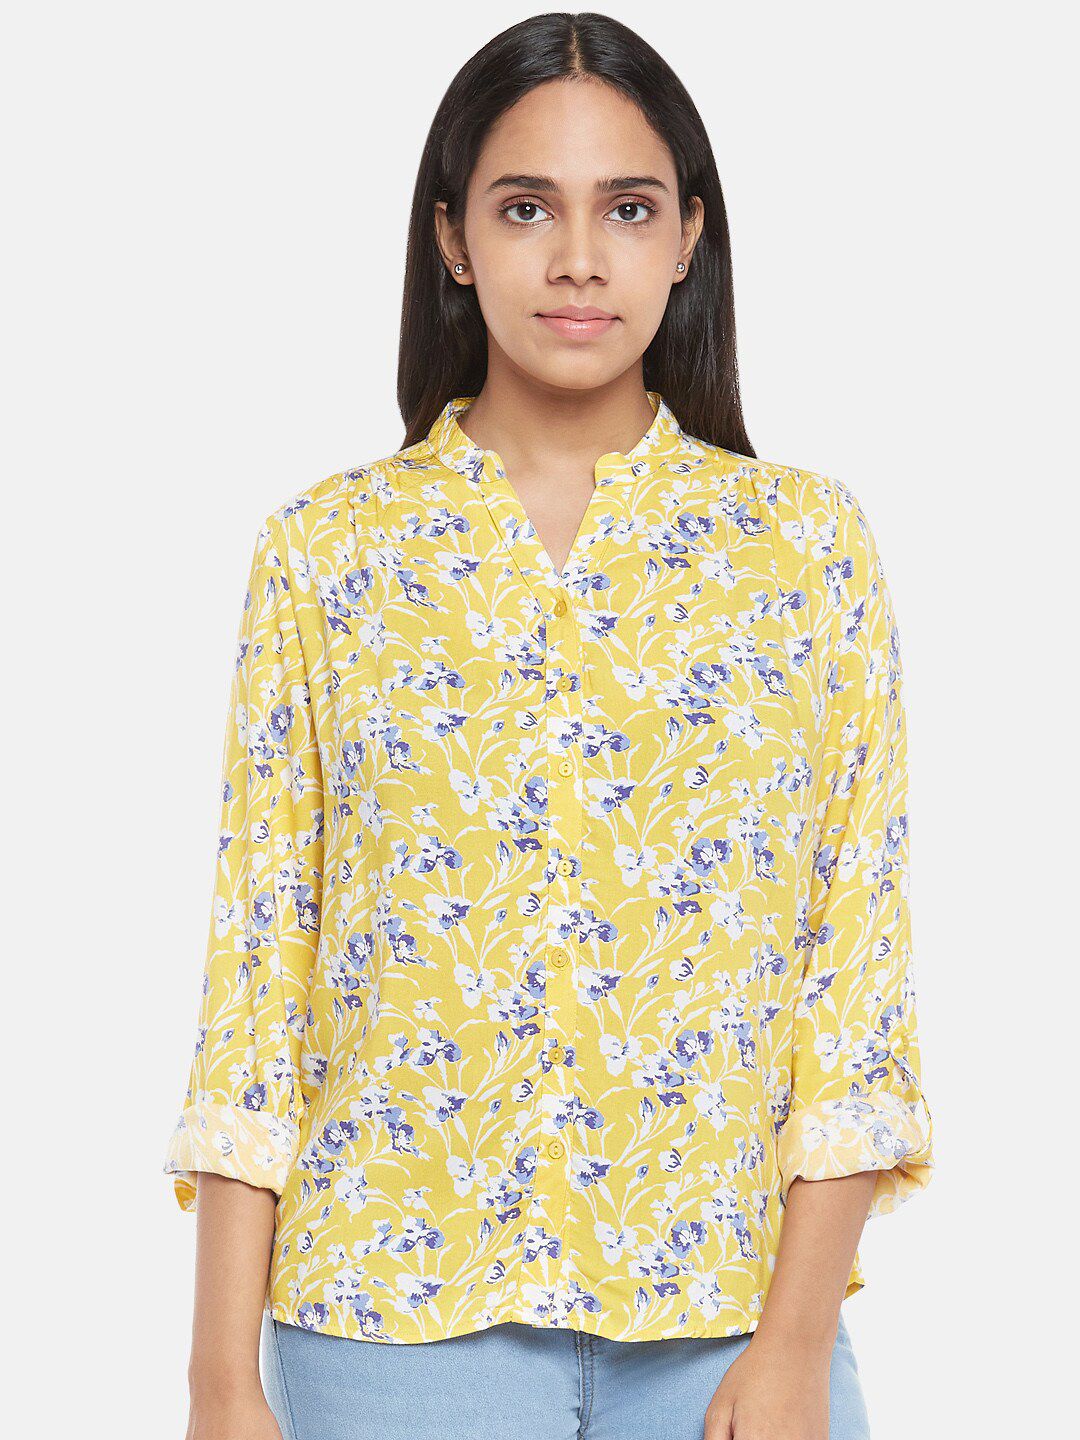 Honey by Pantaloons Yellow & Blue Floral Printed Mandarin Collar Roll-Up Sleeves Top Price in India